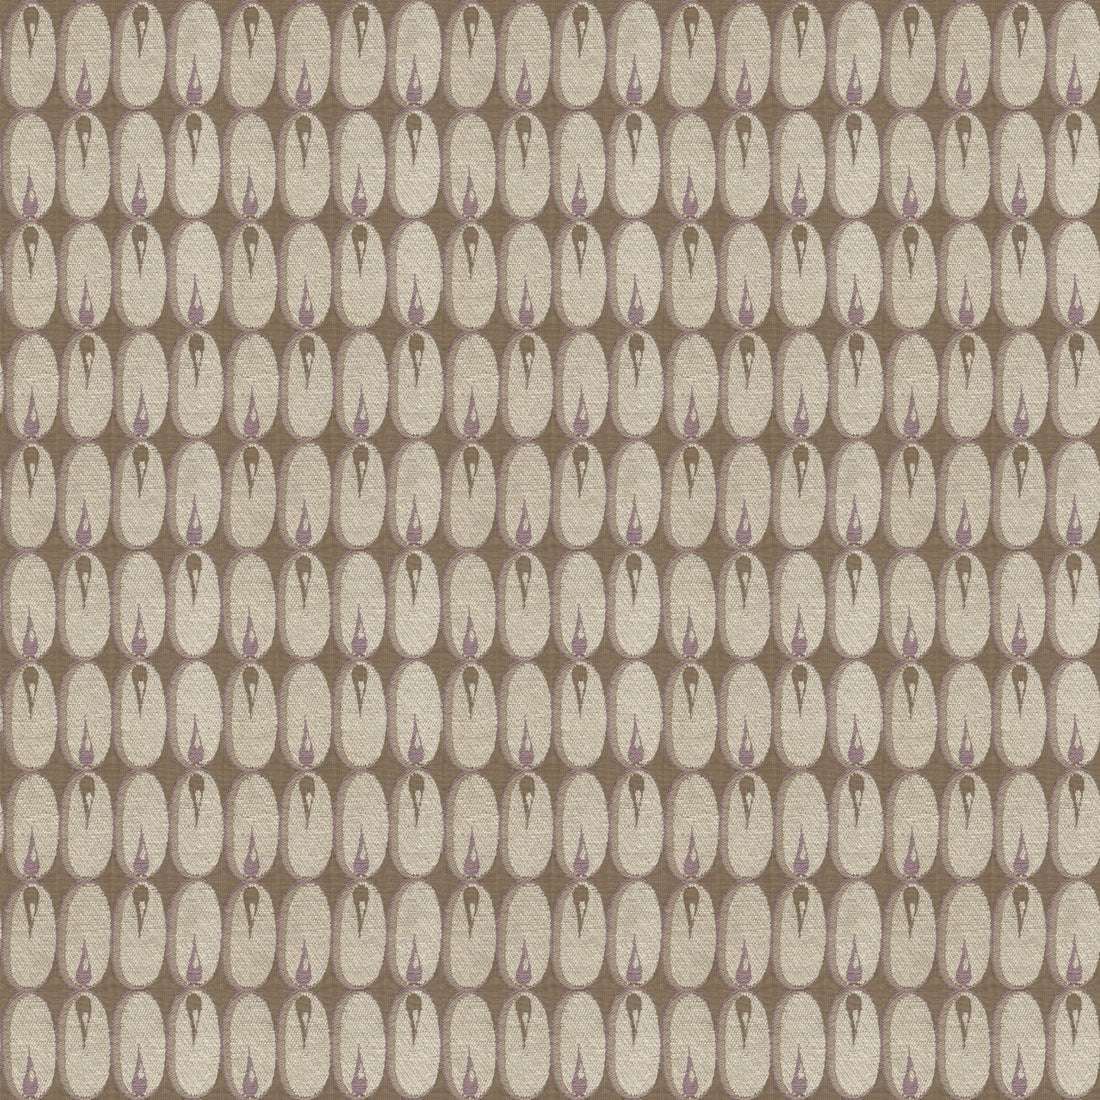 Oval Flame fabric in lilac color - pattern GWF-2924.10.0 - by Lee Jofa Modern in the Allegra Hicks II collection